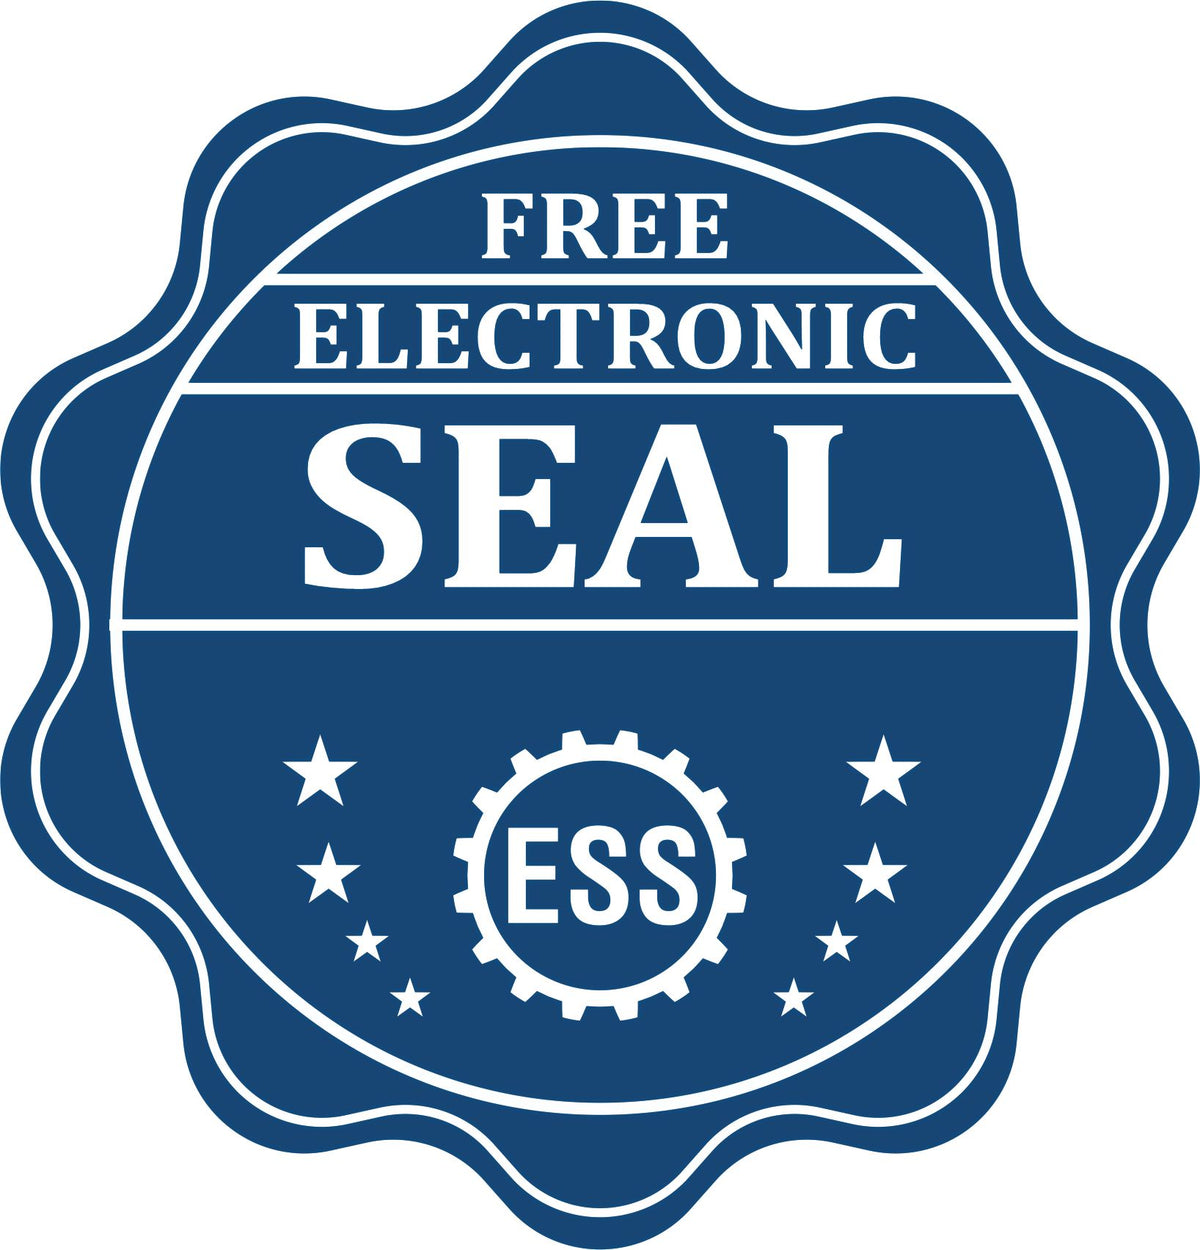 A badge showing a free electronic seal for the PSI Wisconsin Notary Stamp with stars and the ESS gear on the emblem.